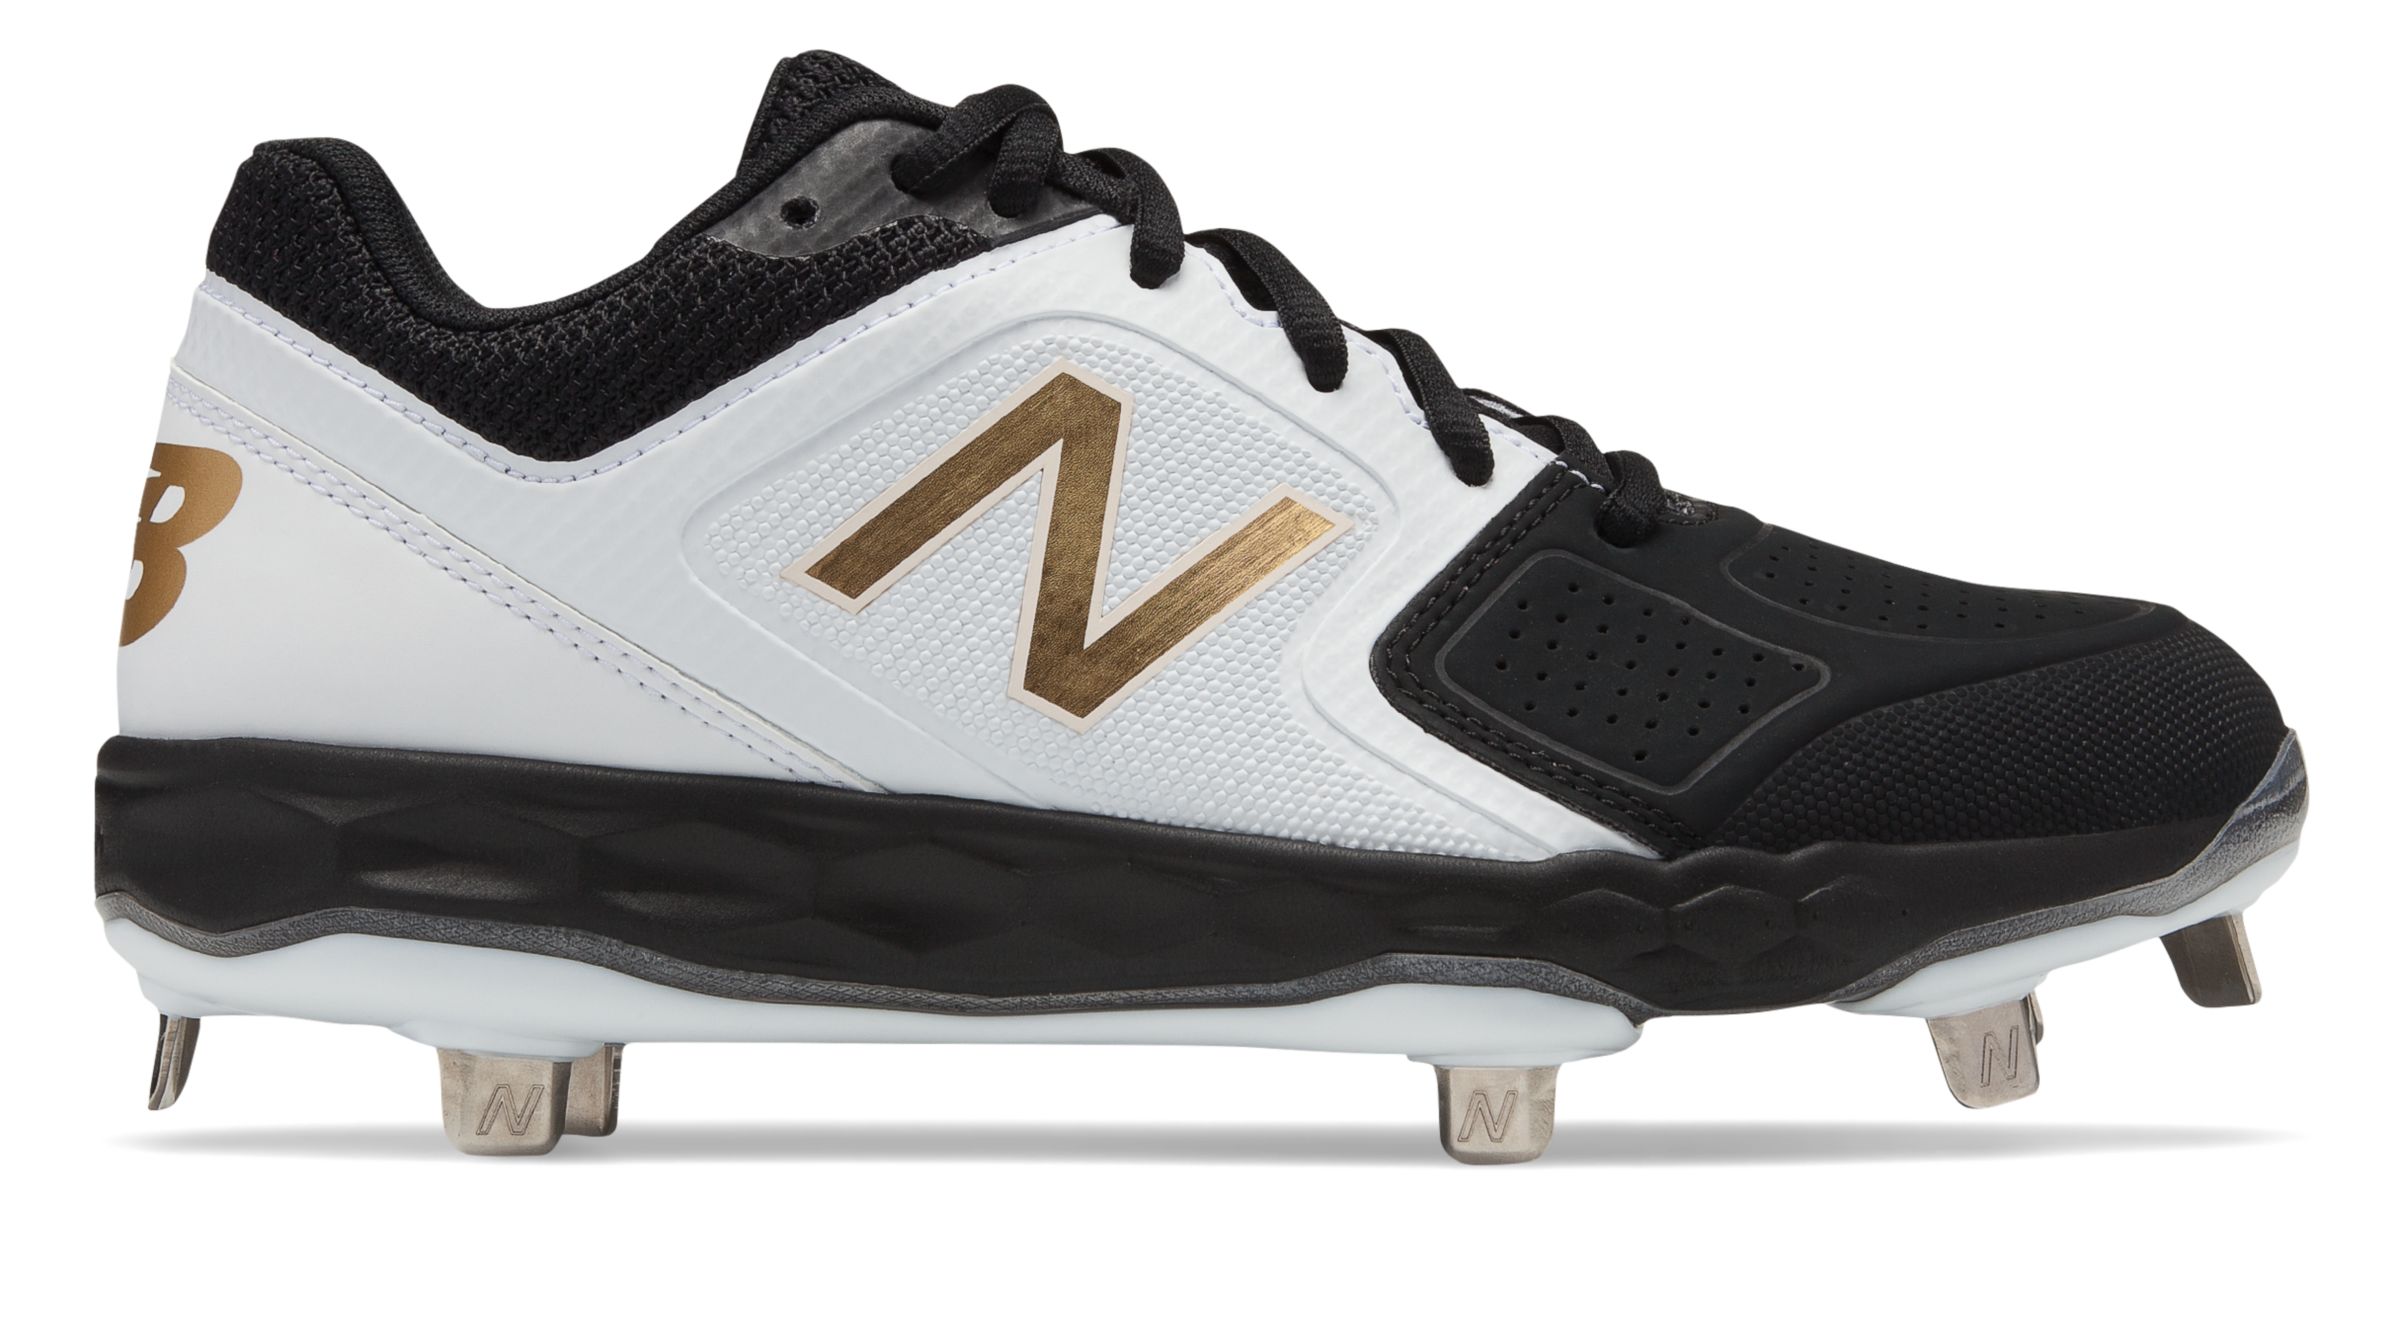 Fastpitch Metal Cleats - New Balance 